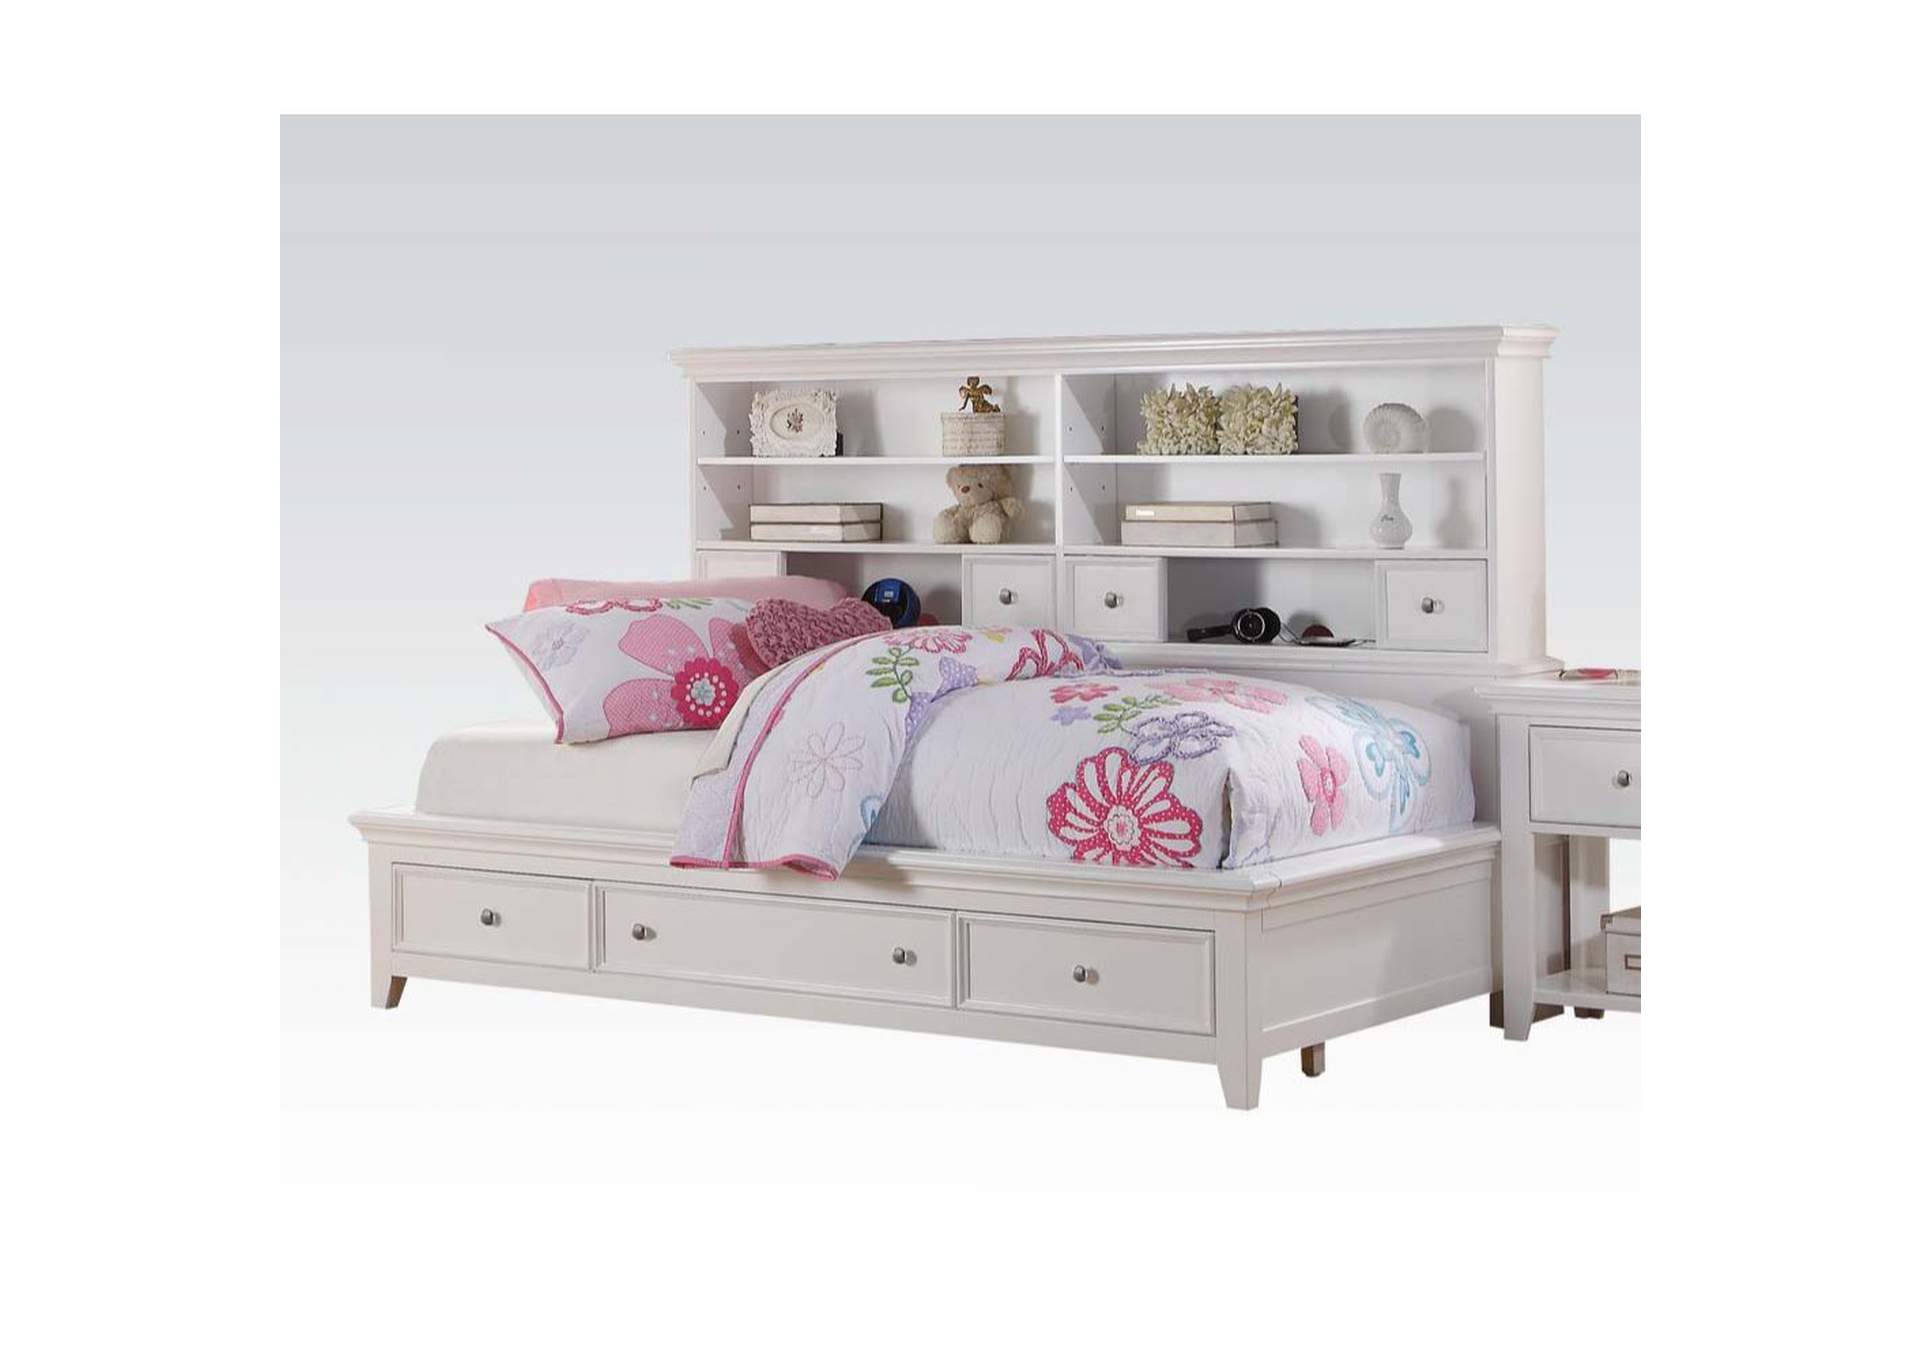 Lacey Daybed,Acme